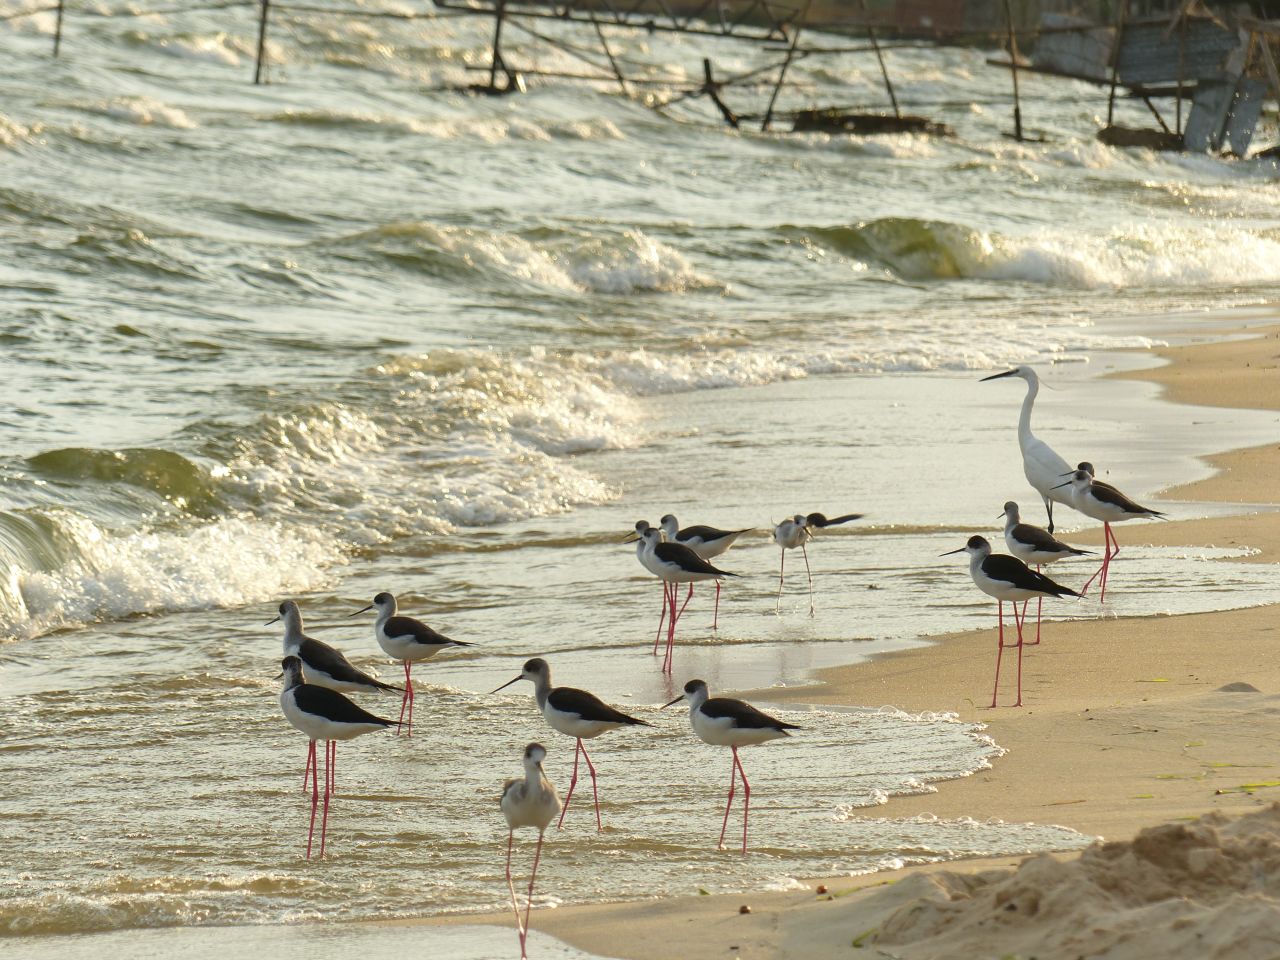 Entebbe is expected to welcome just under half a million visitors in 2015. Birds enjoy the water on Lido Beach, Entebbe. <br /><br /><a href="https://www.cnn.com/2015/03/17/africa/africas-top-ten-cities-for-investors/index.html" target="_blank"><strong>Top 10: Africa's 'Cities of Opportunity' revealed</strong></a>